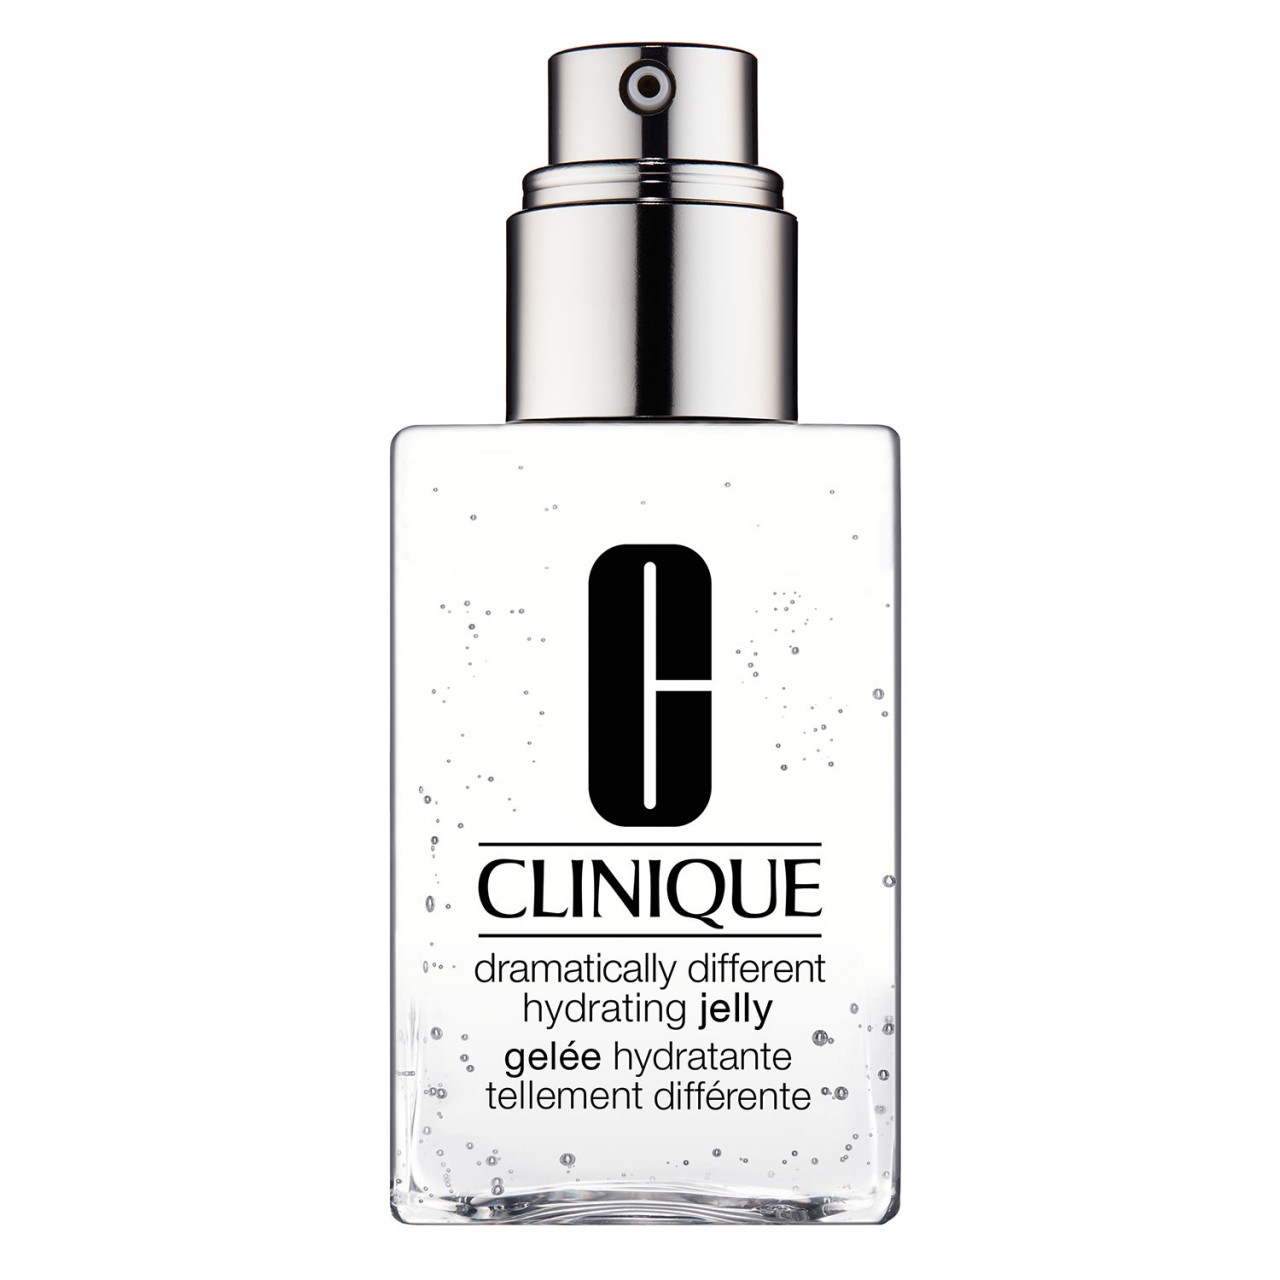 3-Step Skin Care - Dramatically Different Hydrating Jelly von Clinique